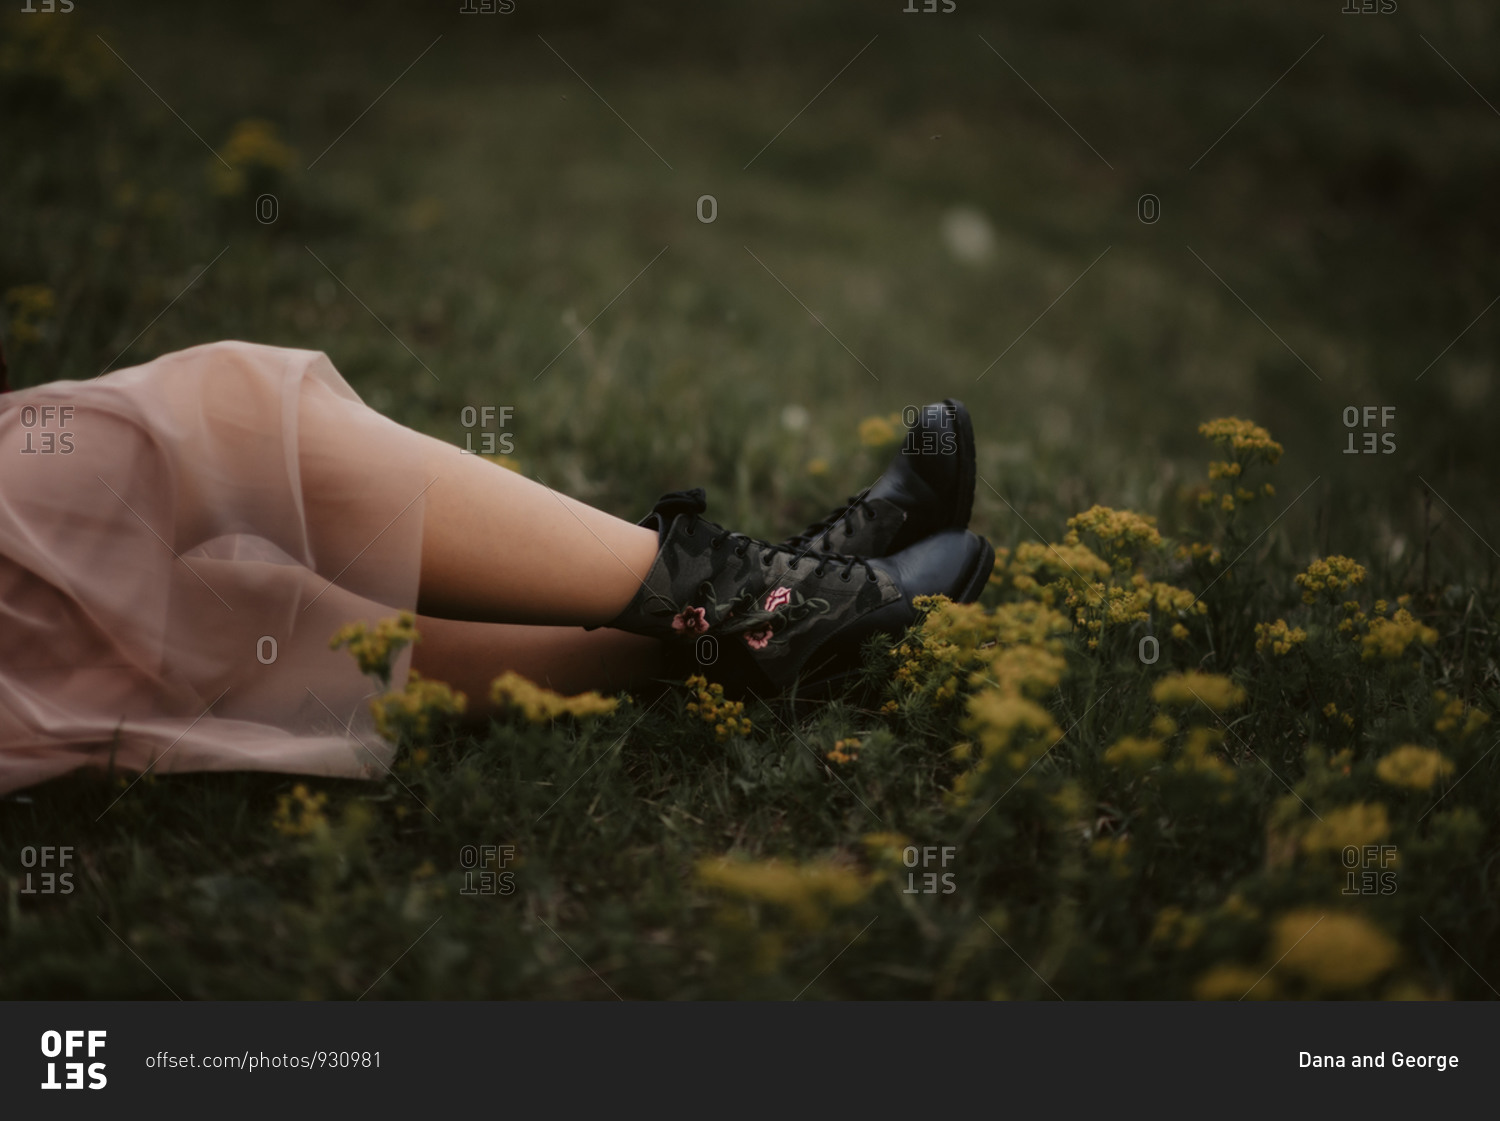 Woman's feet wearing black boots with pink flowers in a field